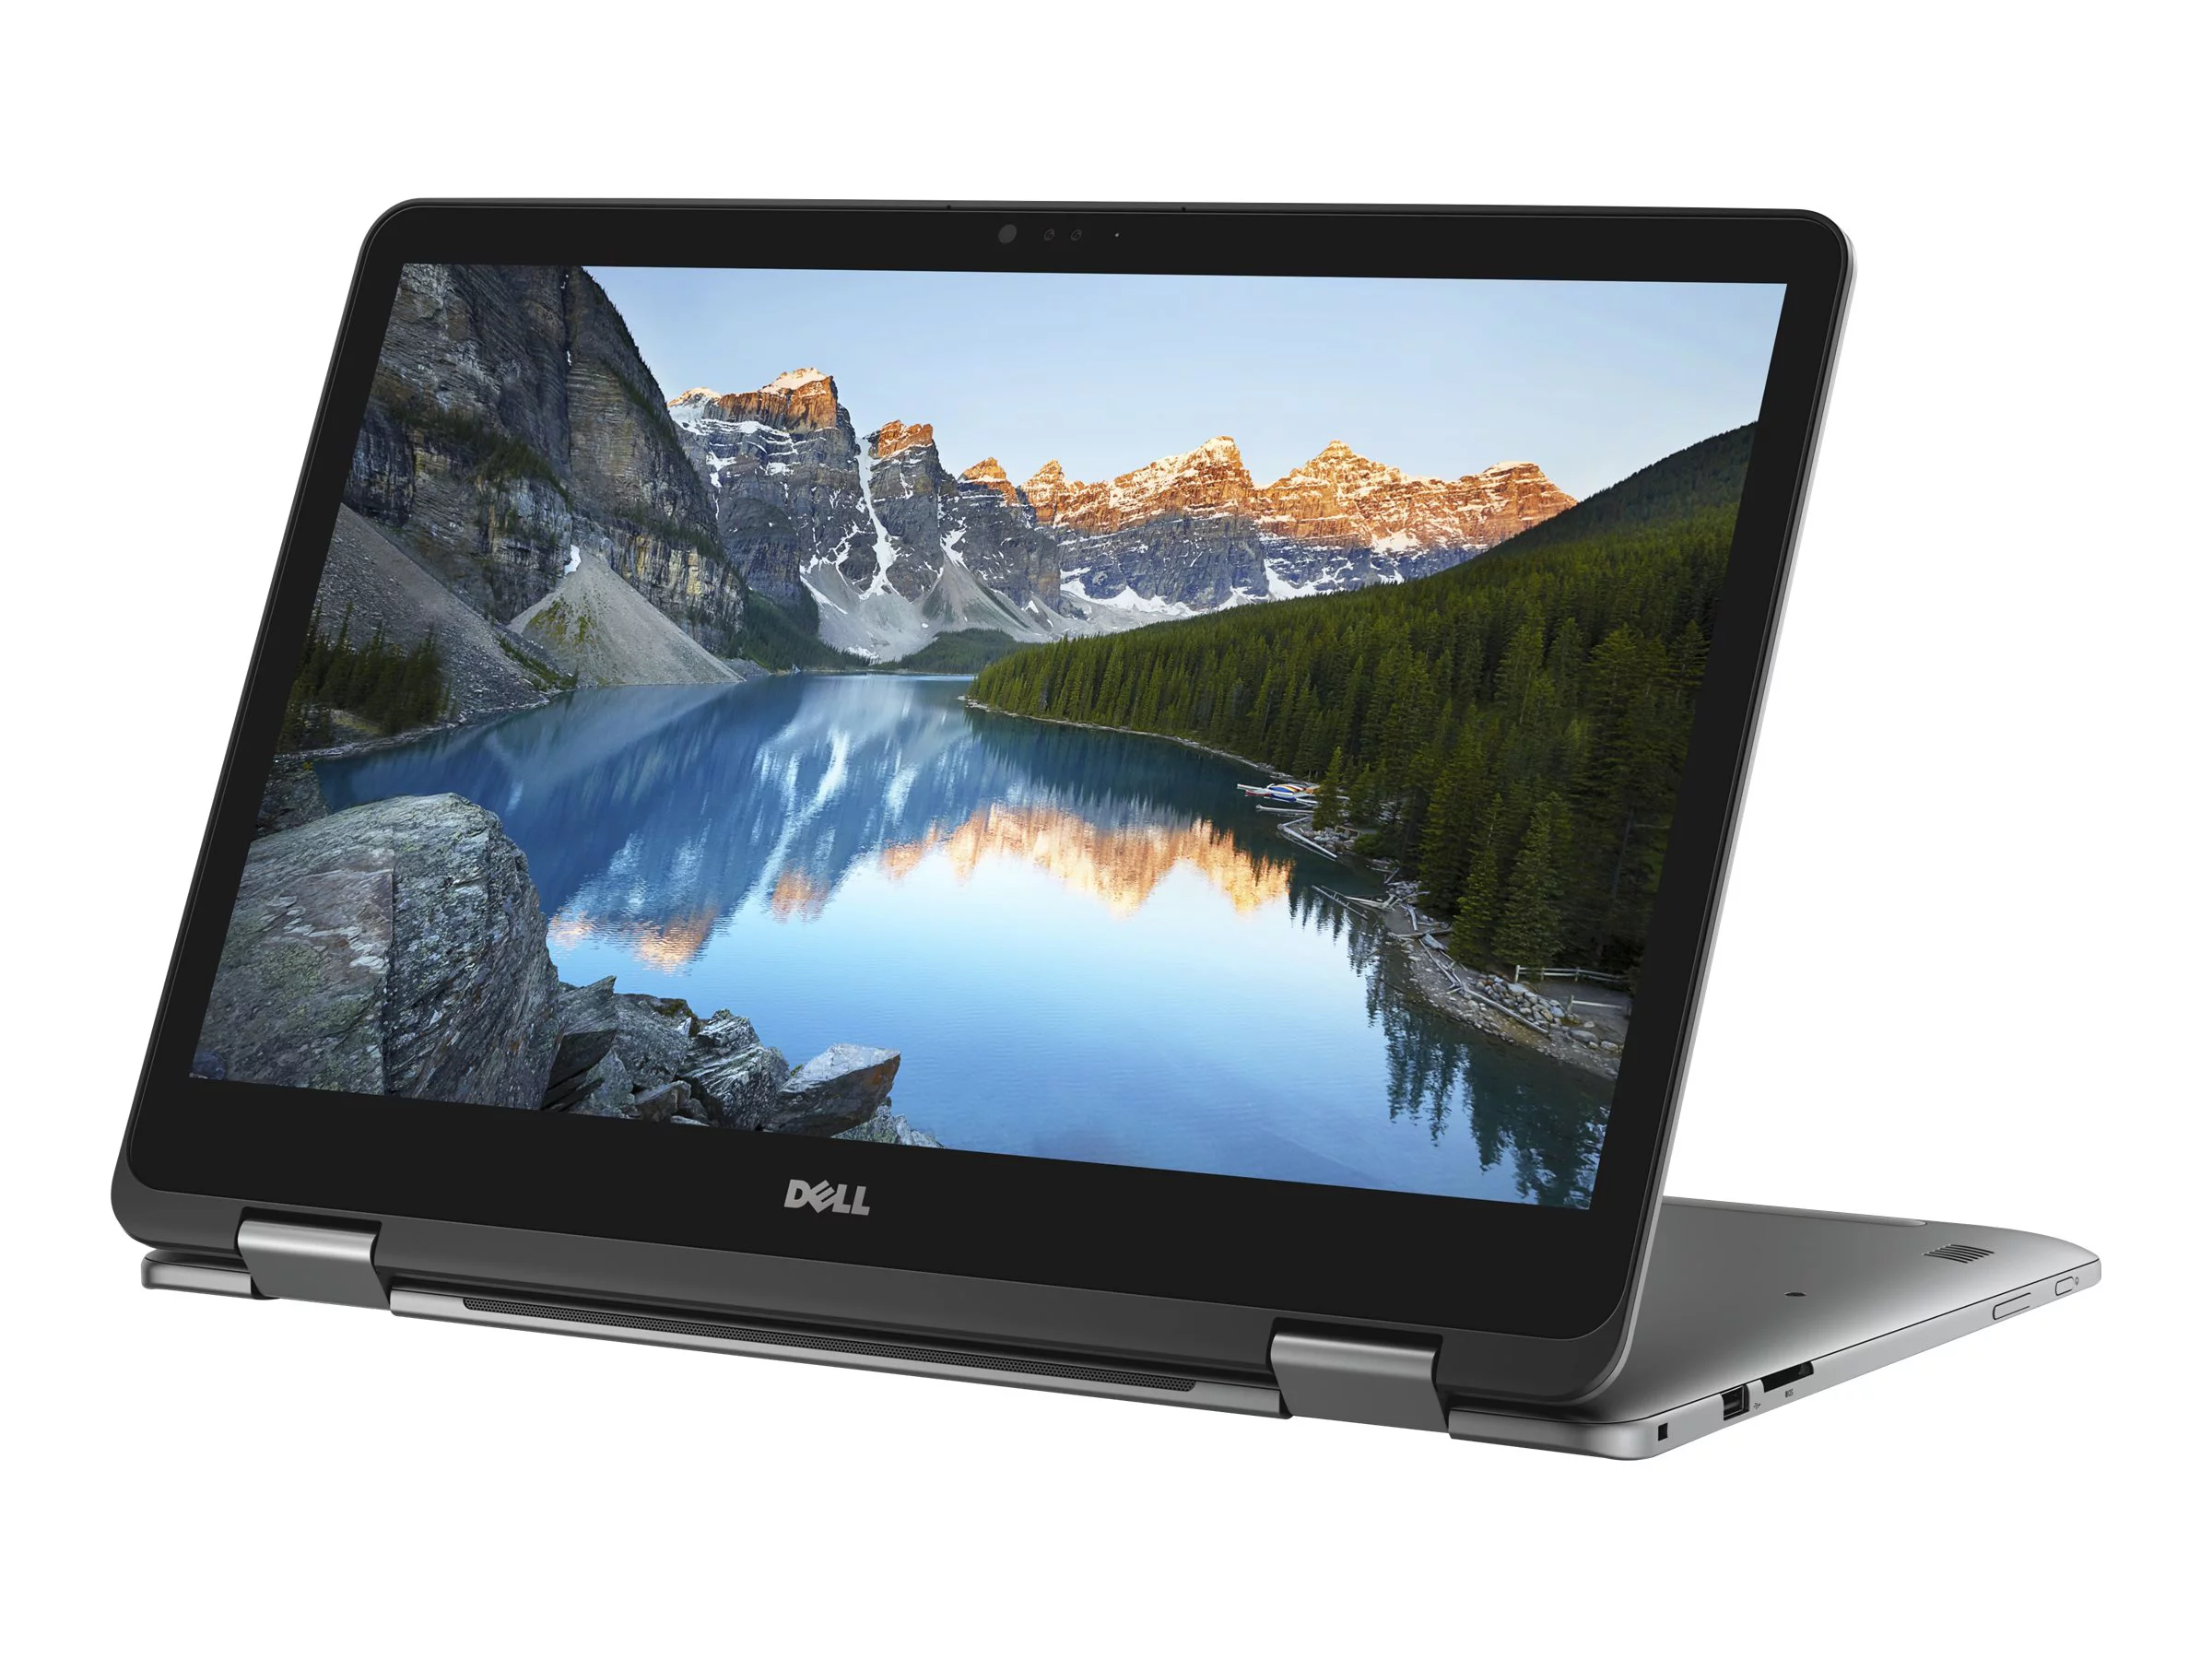  Dell Inspiron 17 7779 Notebook